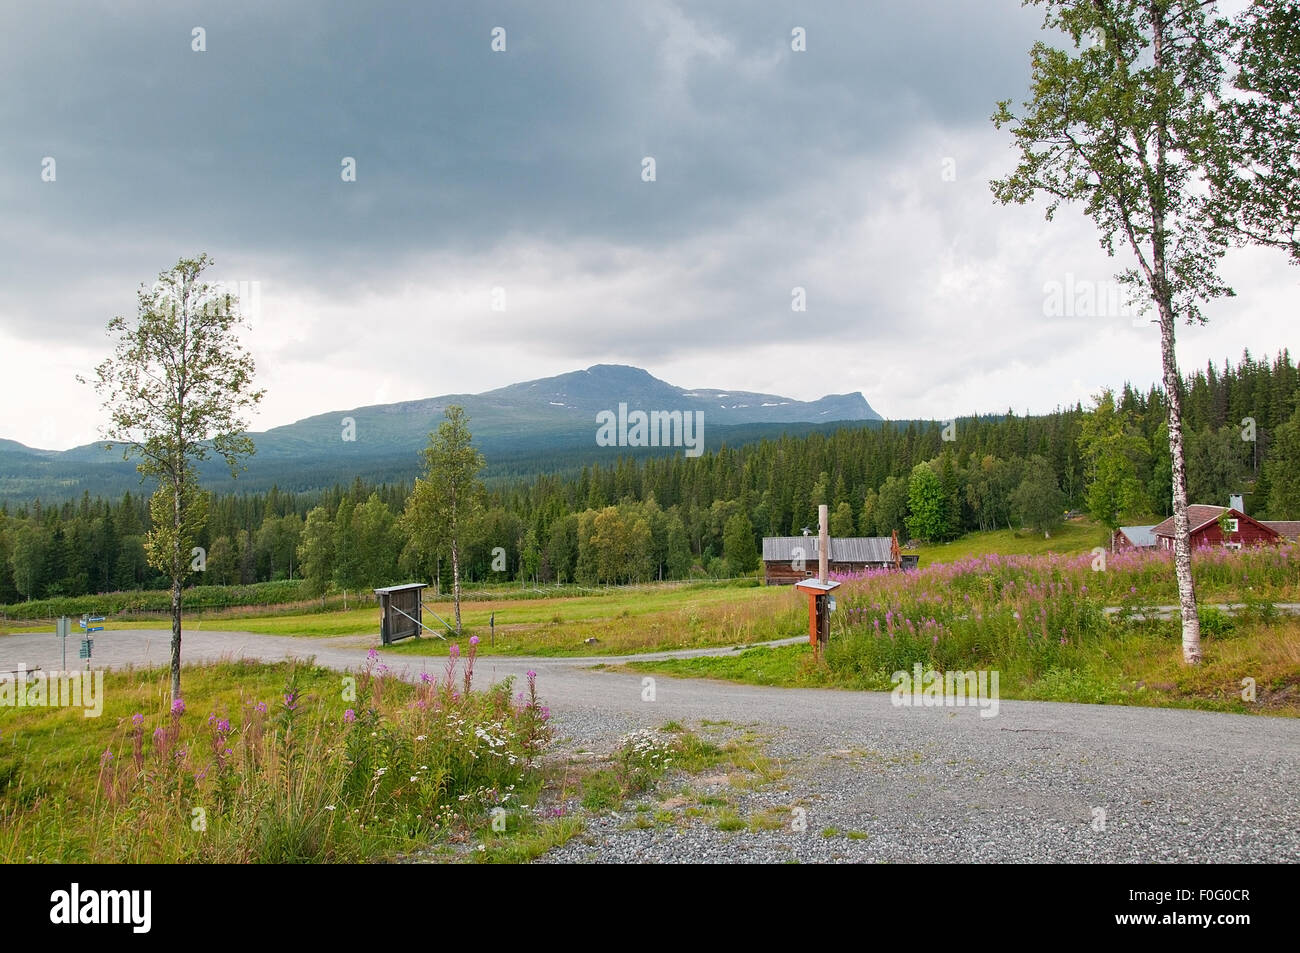 Swedish scenery. Scenic landscape near Ostersund in Northern Sweden on an overcast day. Stock Photo